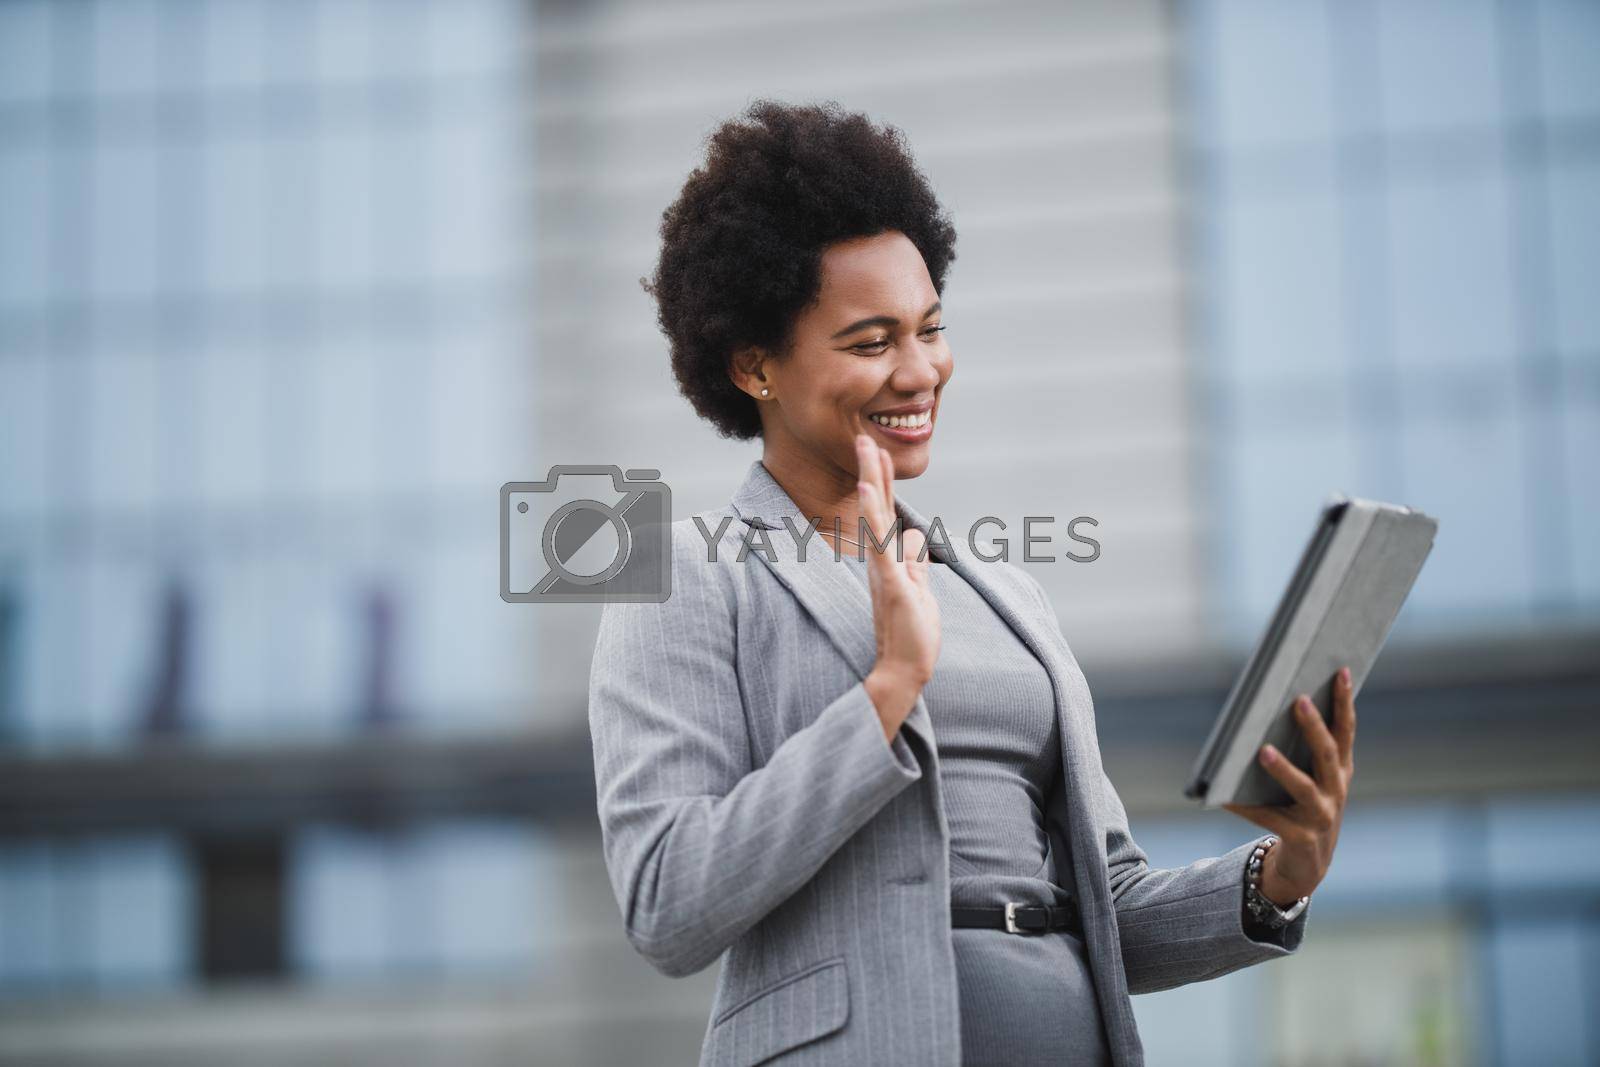 Portrait of a smiling black business woman making video call on a digital tablet in front a corporate building.